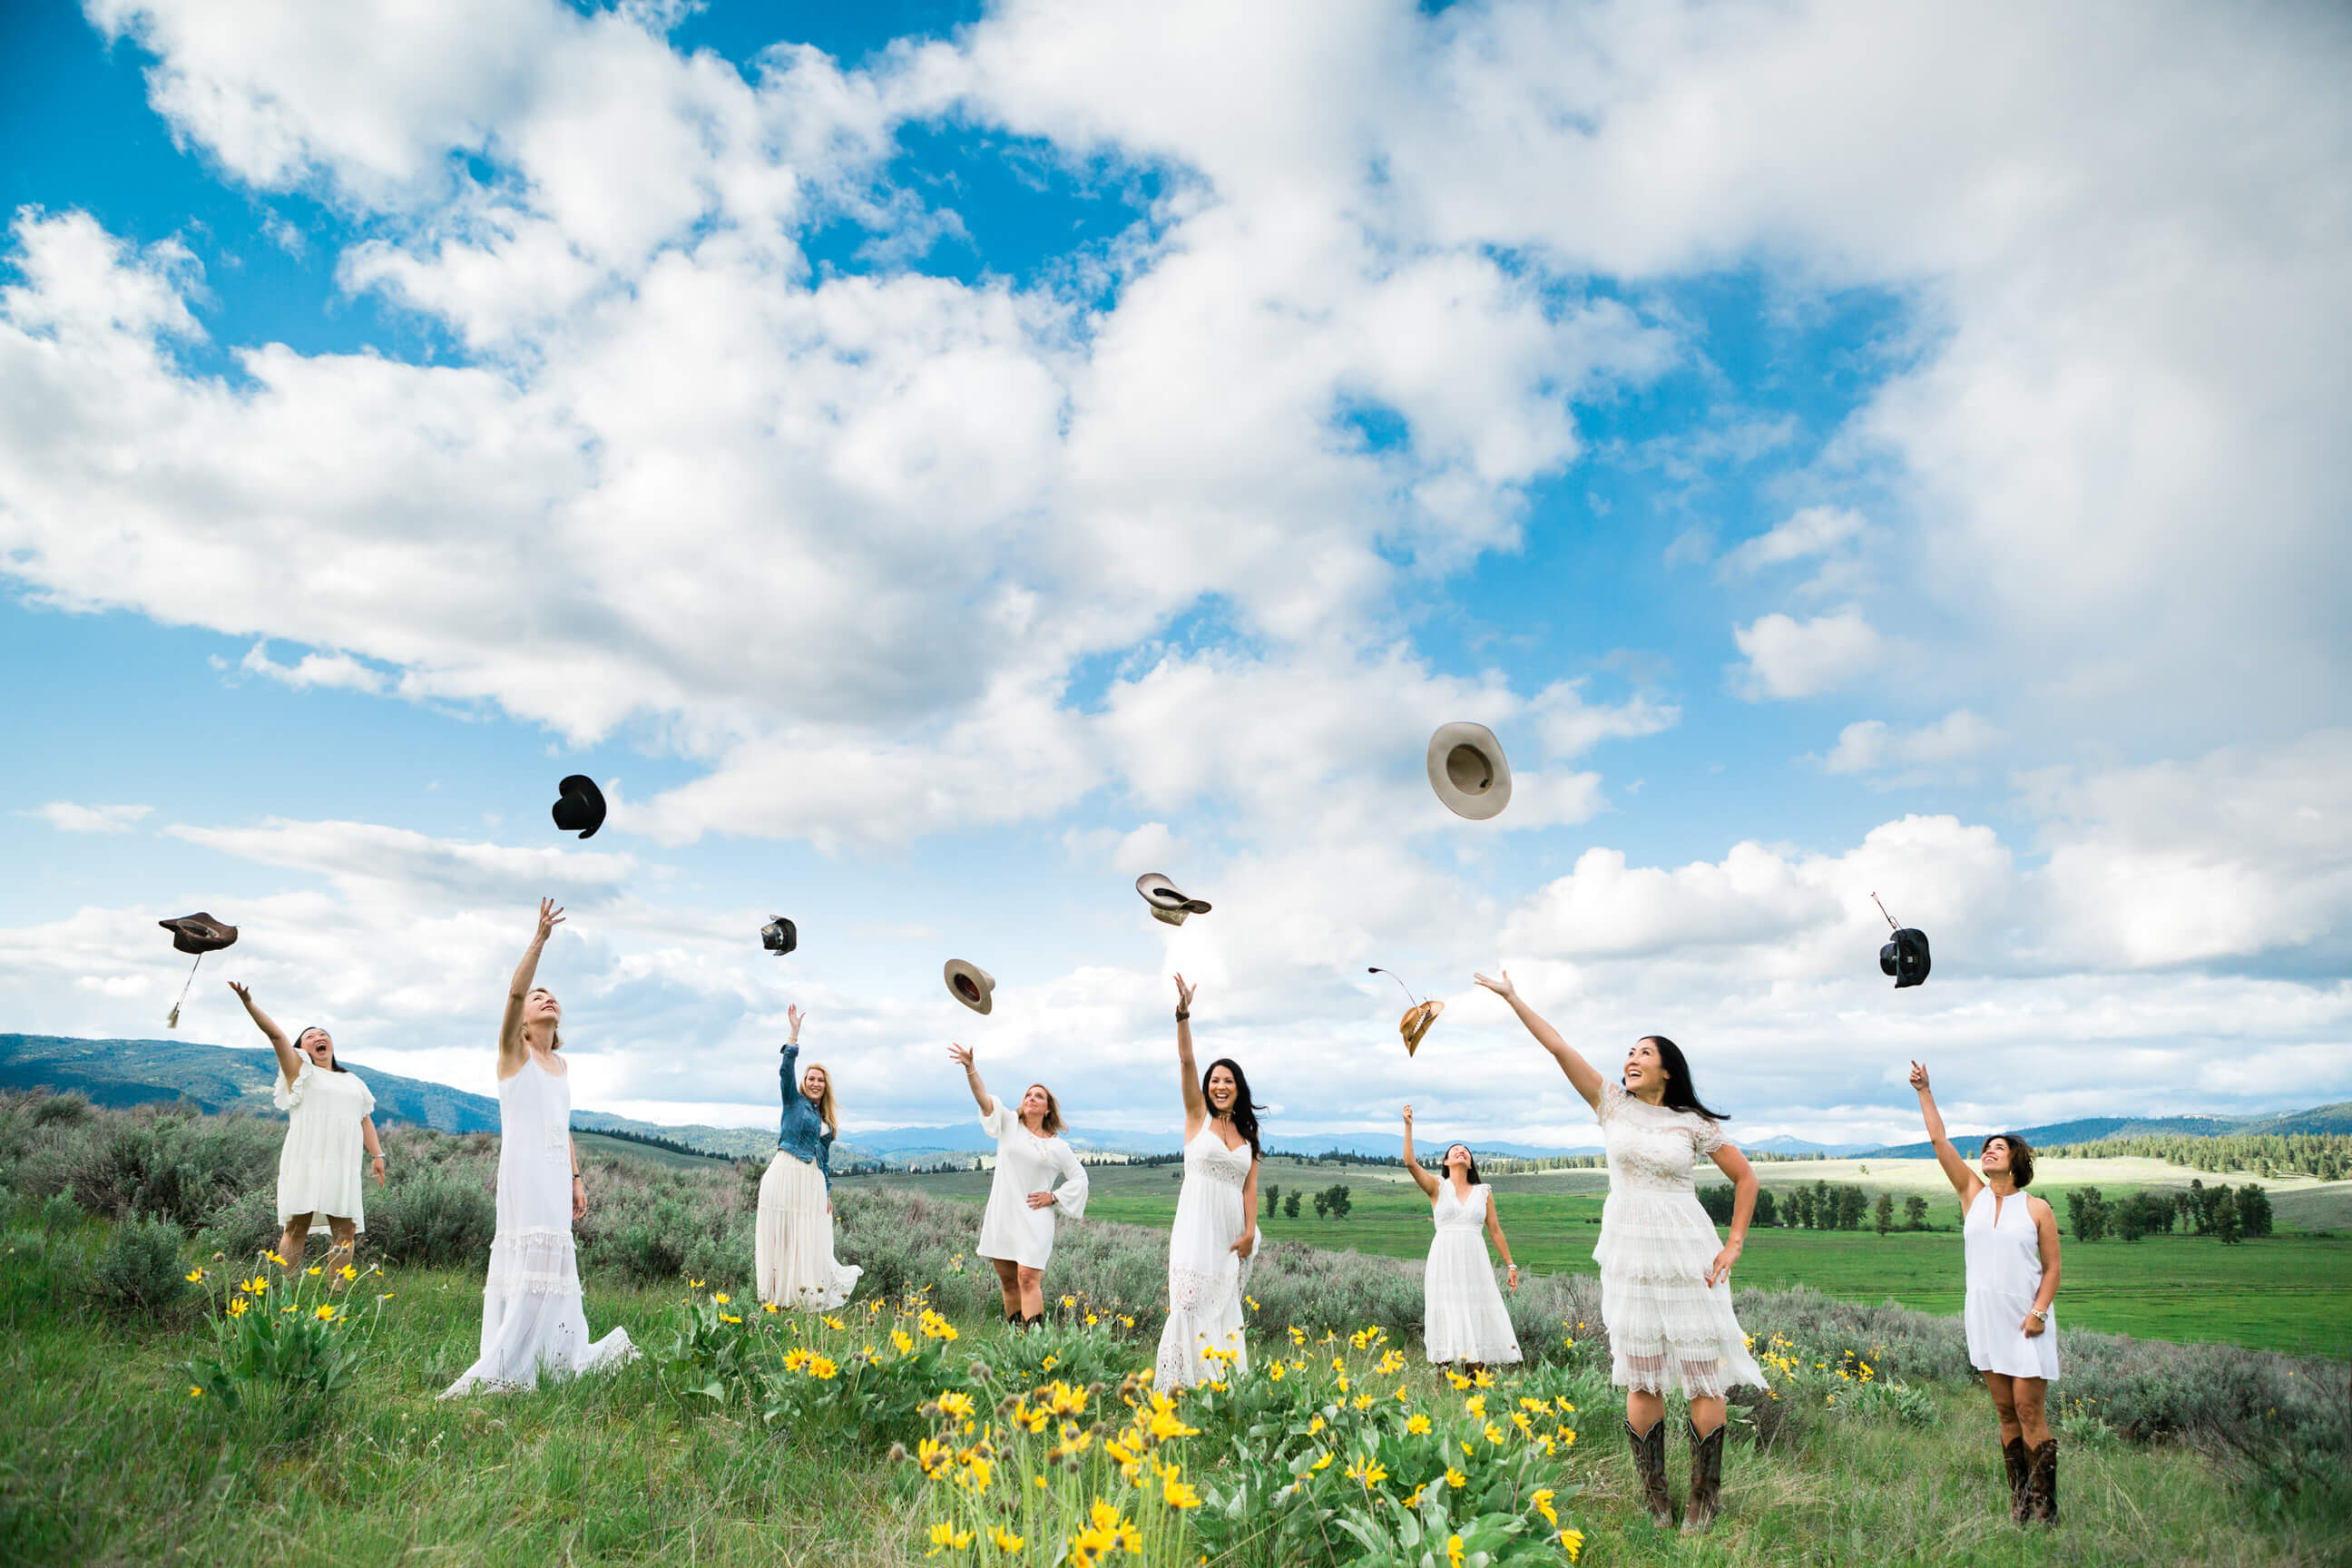 A group of women friends wearing white dresses stand in a field of wildflowers and toss their hats into the air at Paws Up Resort in Montana